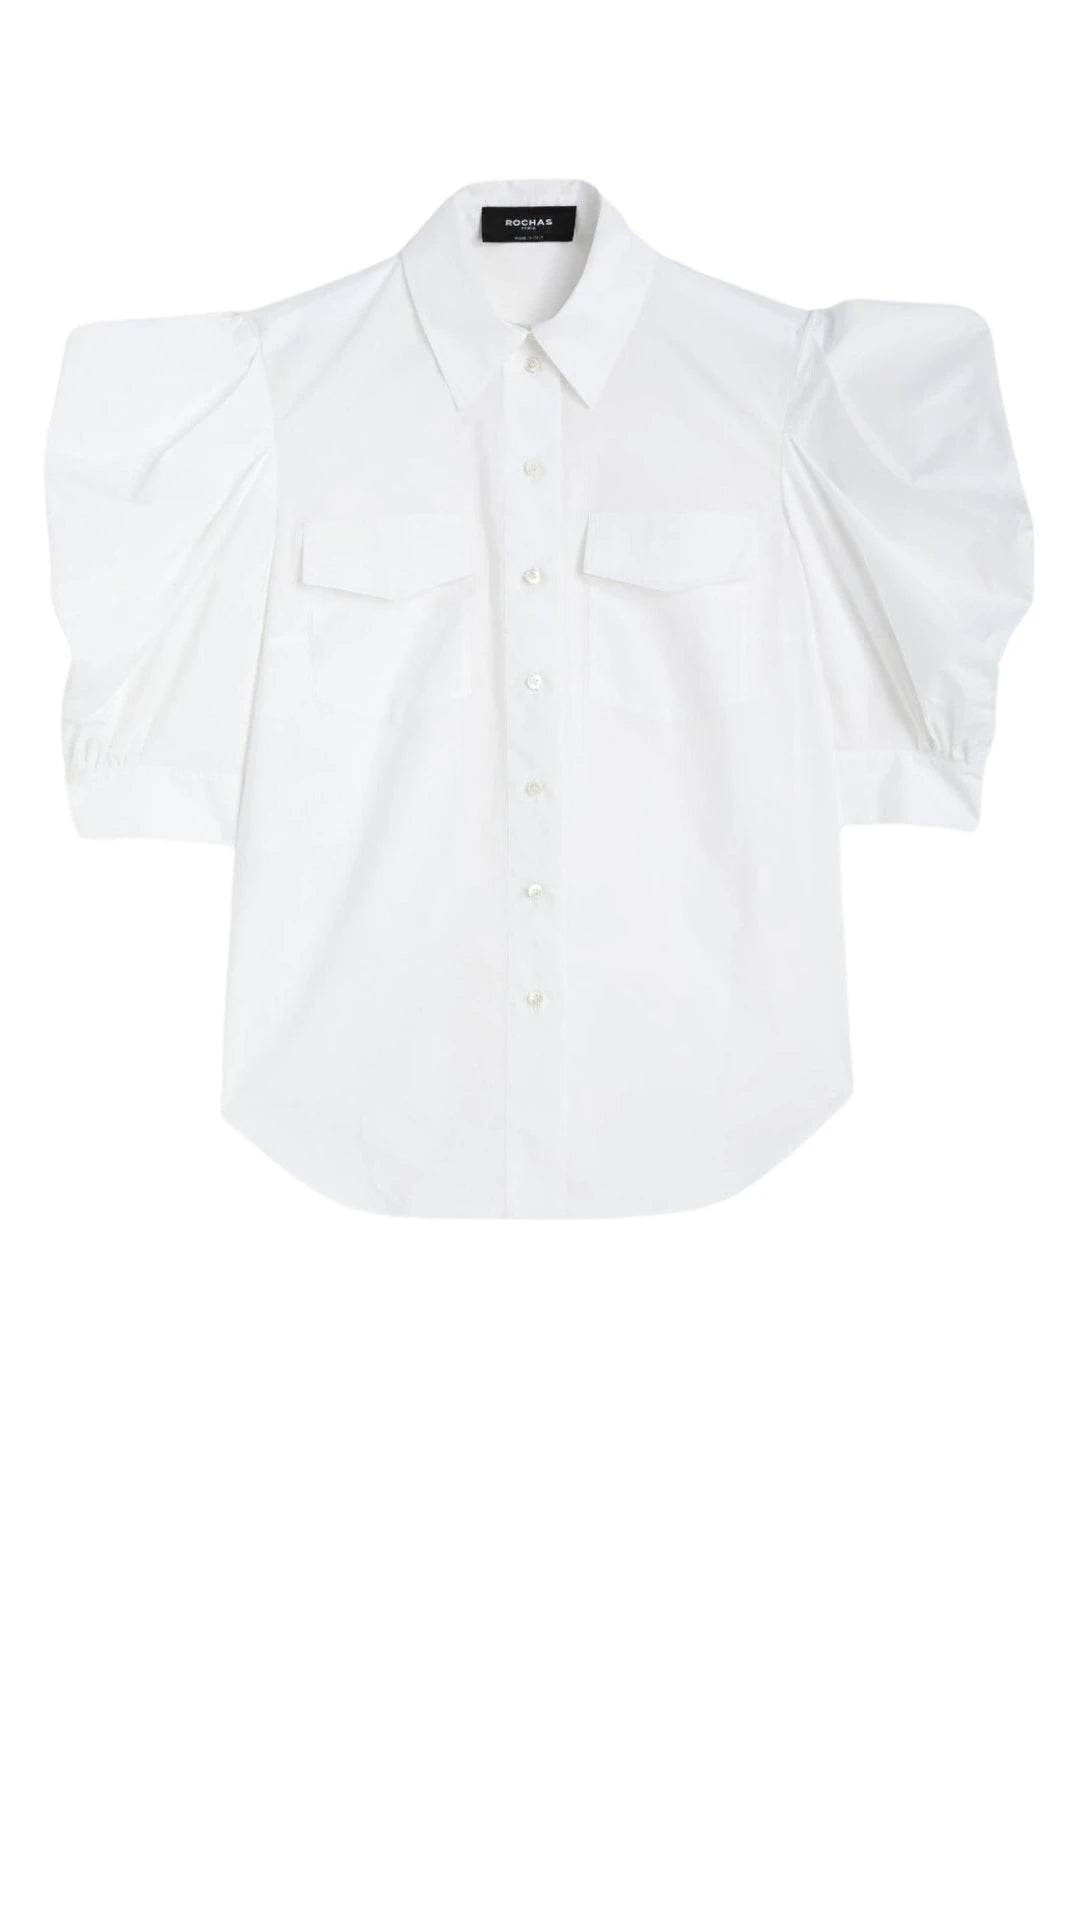 Rochas Paris Cotton Poplin Short Sleeved Shirt. A button up blouse in lightweight cotton it has two front pockets and puffed sleeves. Product photo of the front.